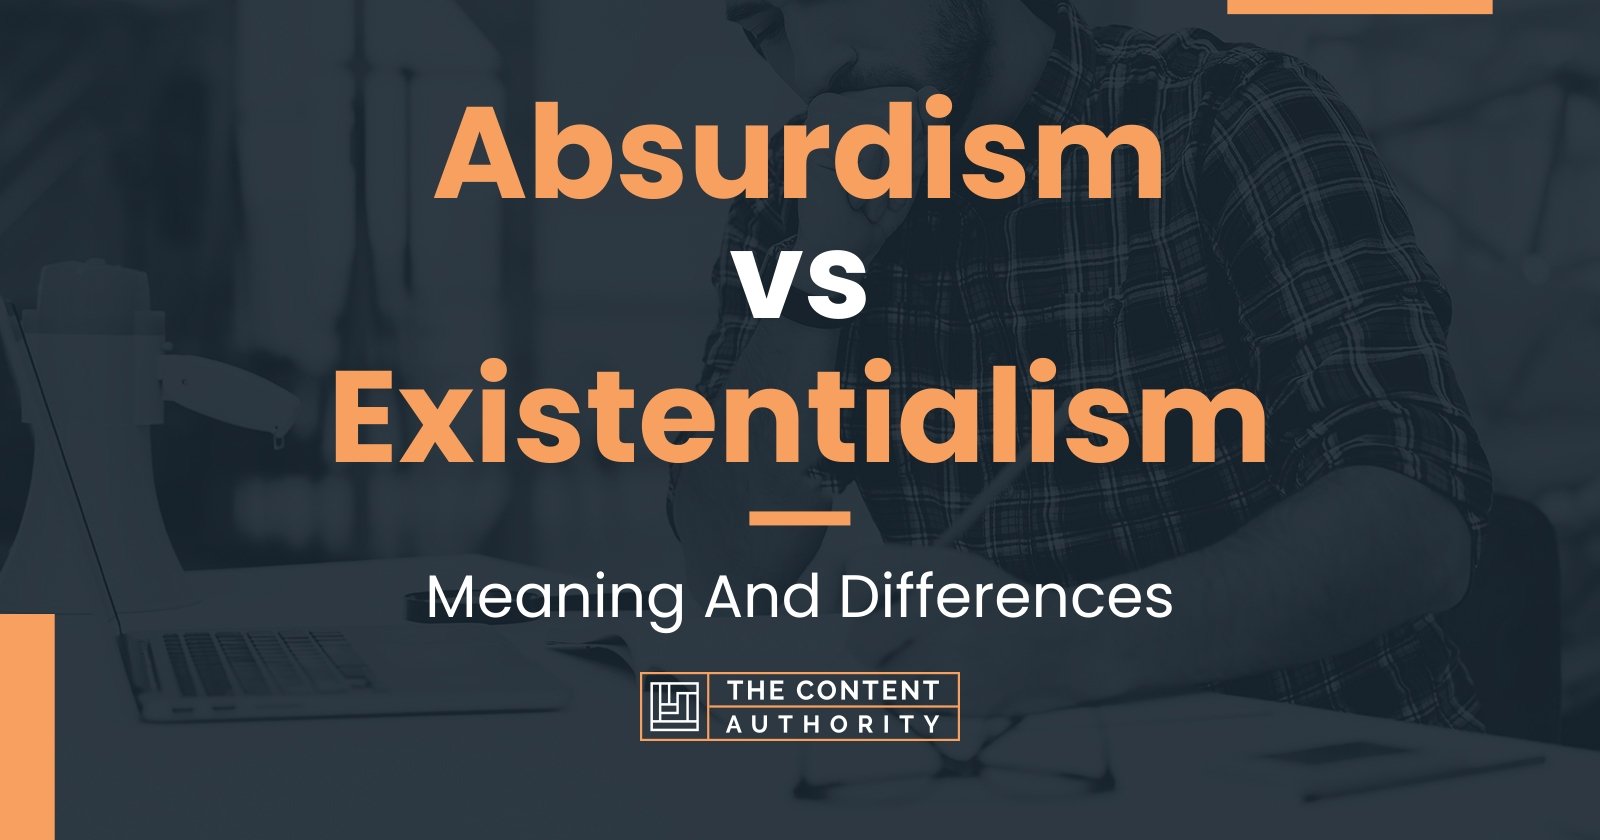 Absurdism vs Existentialism: Meaning And Differences